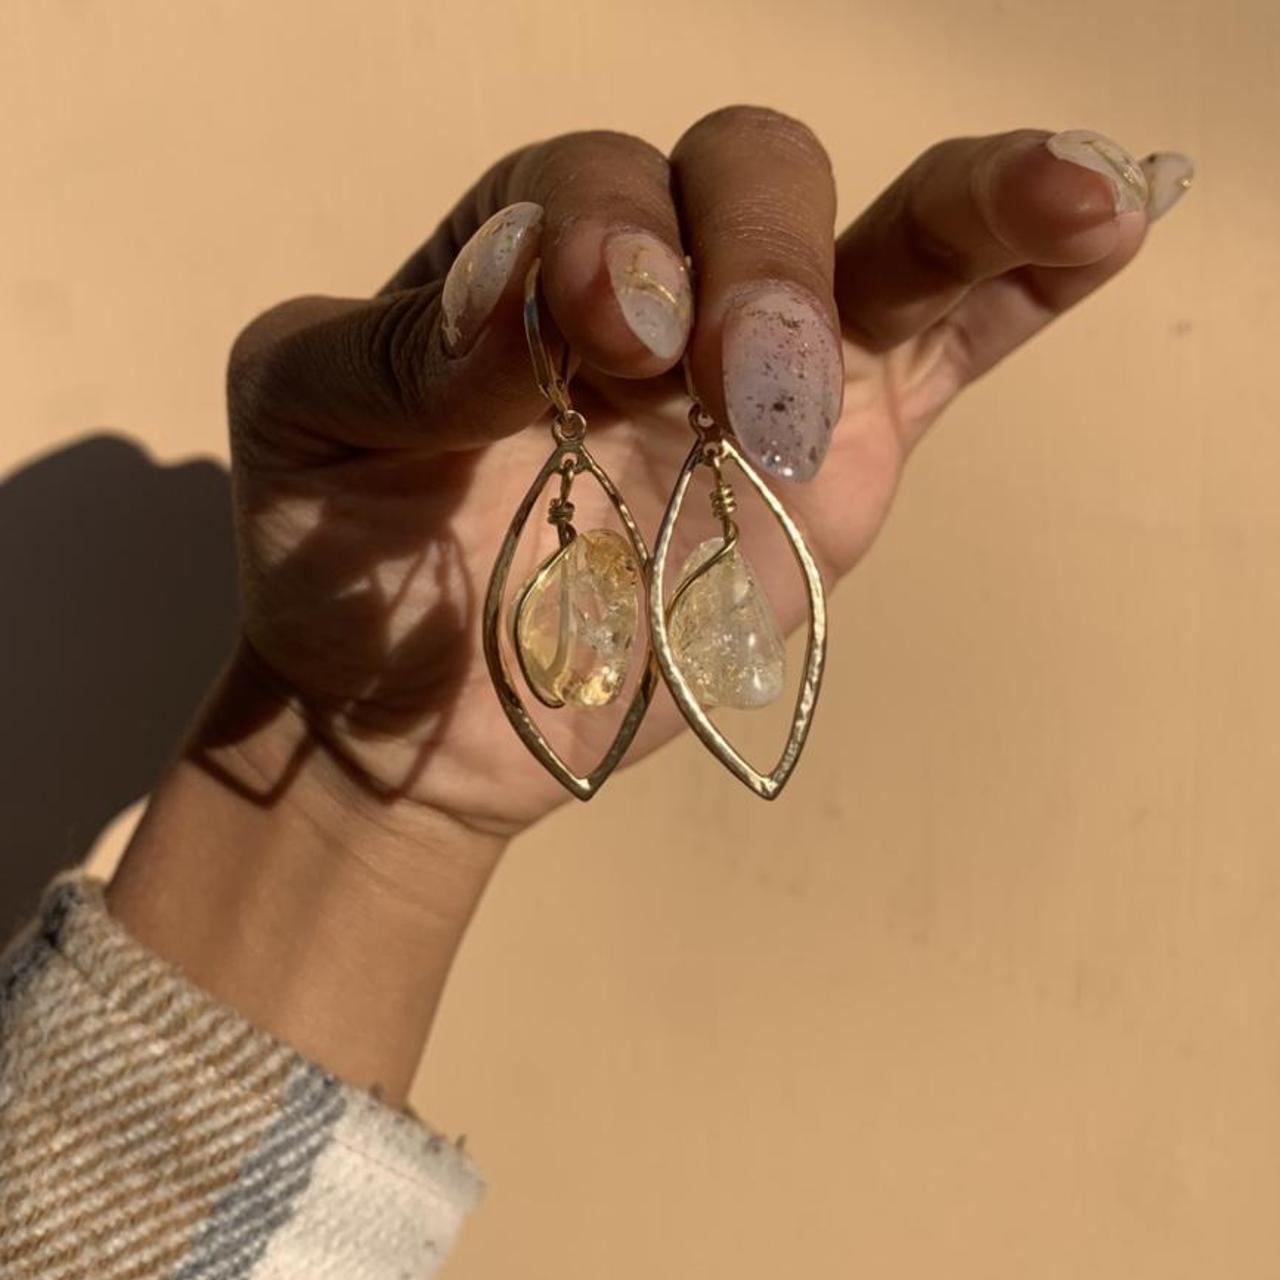 Product Image 2 - The ultimate Citrine babies✨ 
Gold